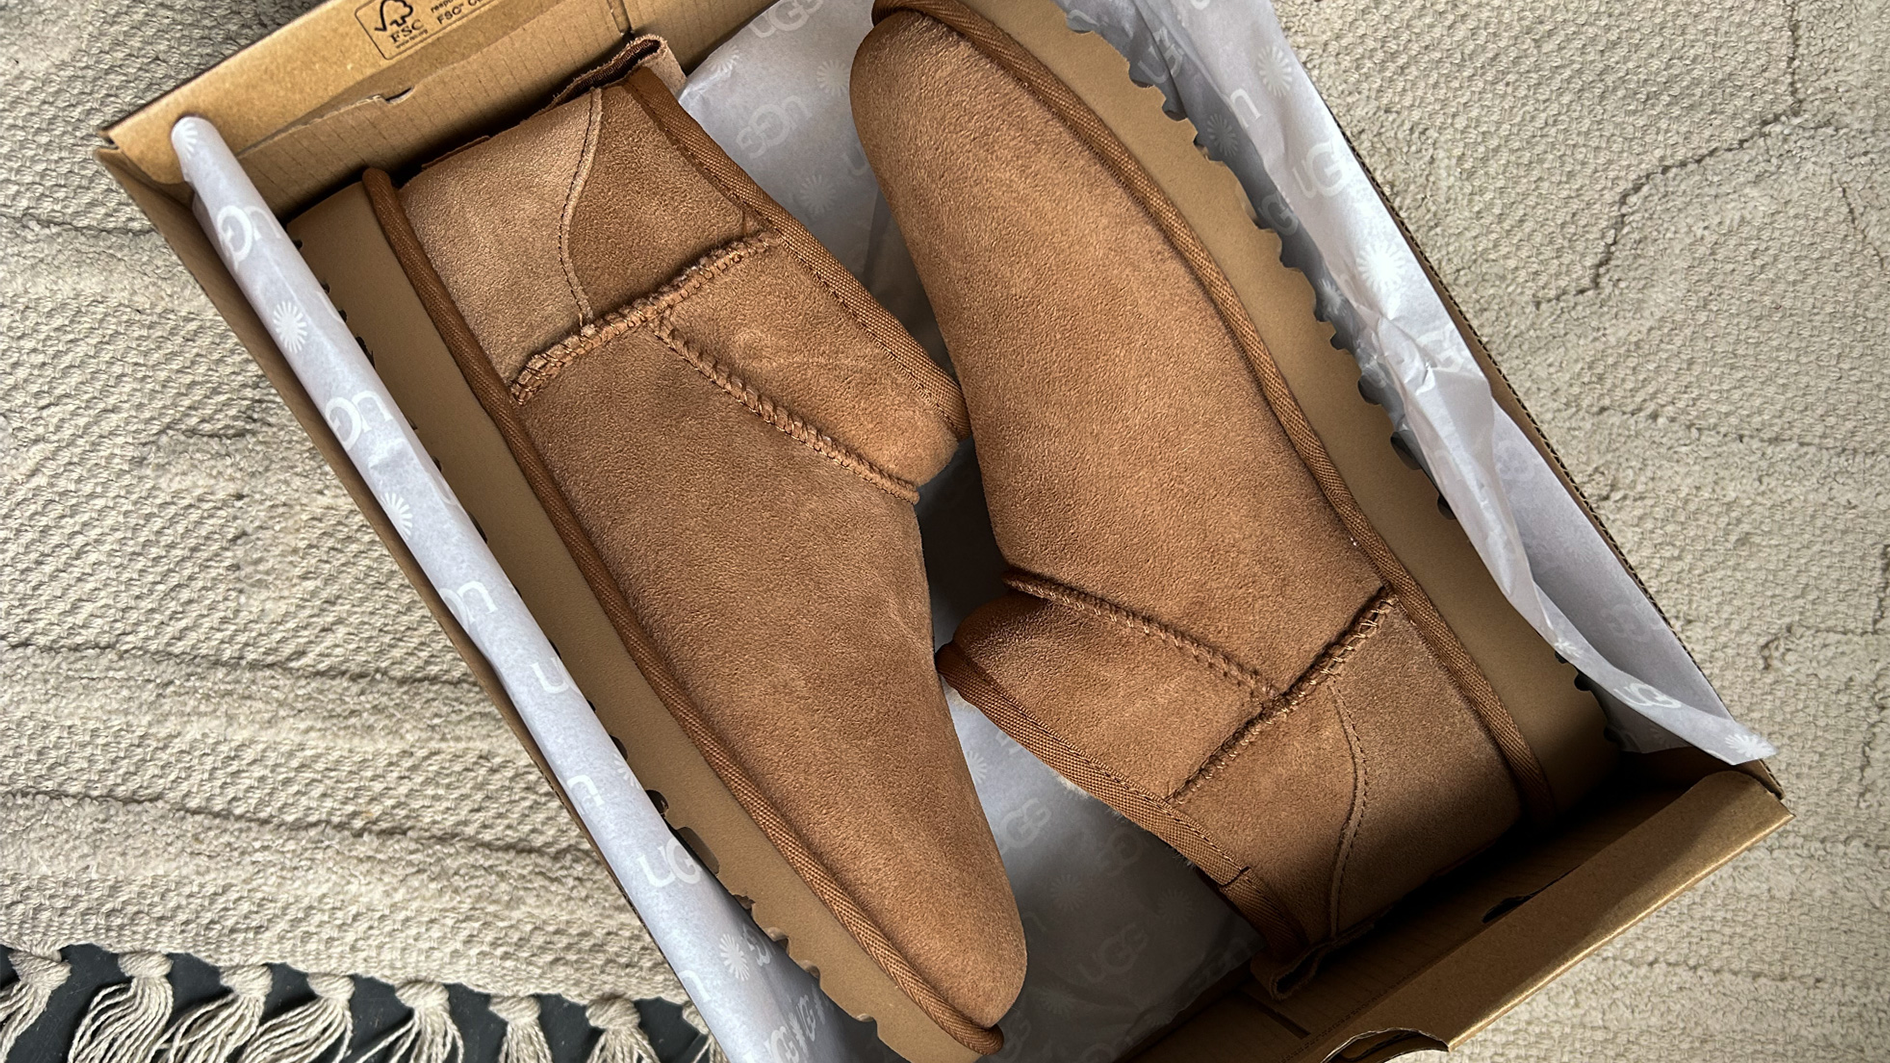 The Ultimate UGG Guide: Does UGG Footwear Run True Size? | Sole